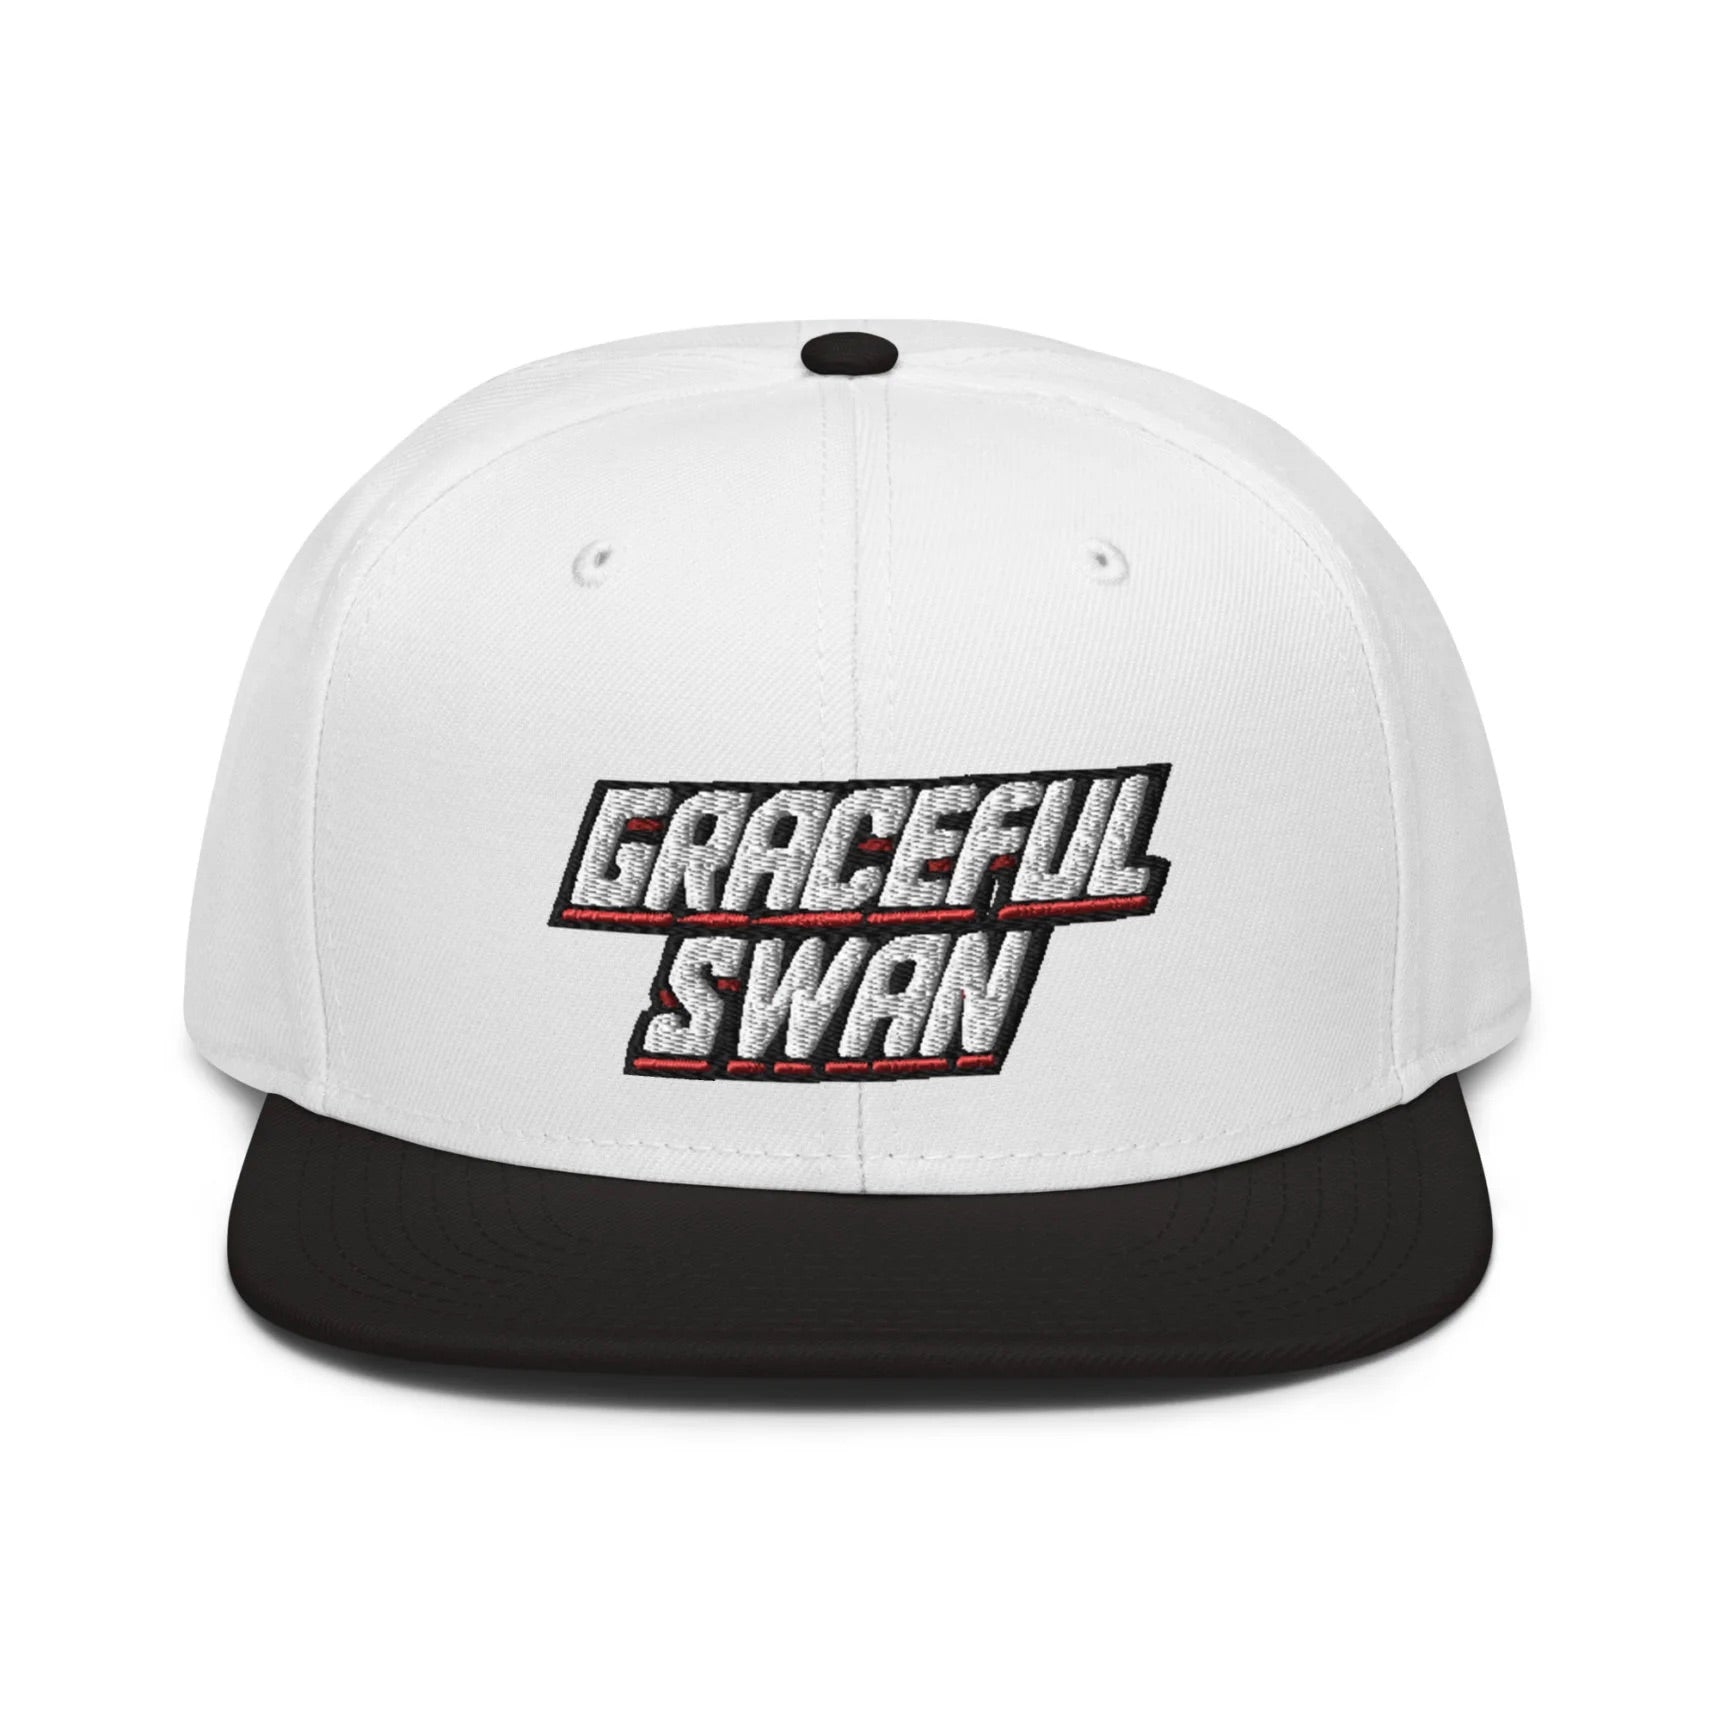 Graceful Swan ShowZone hat in white with black brim and accents